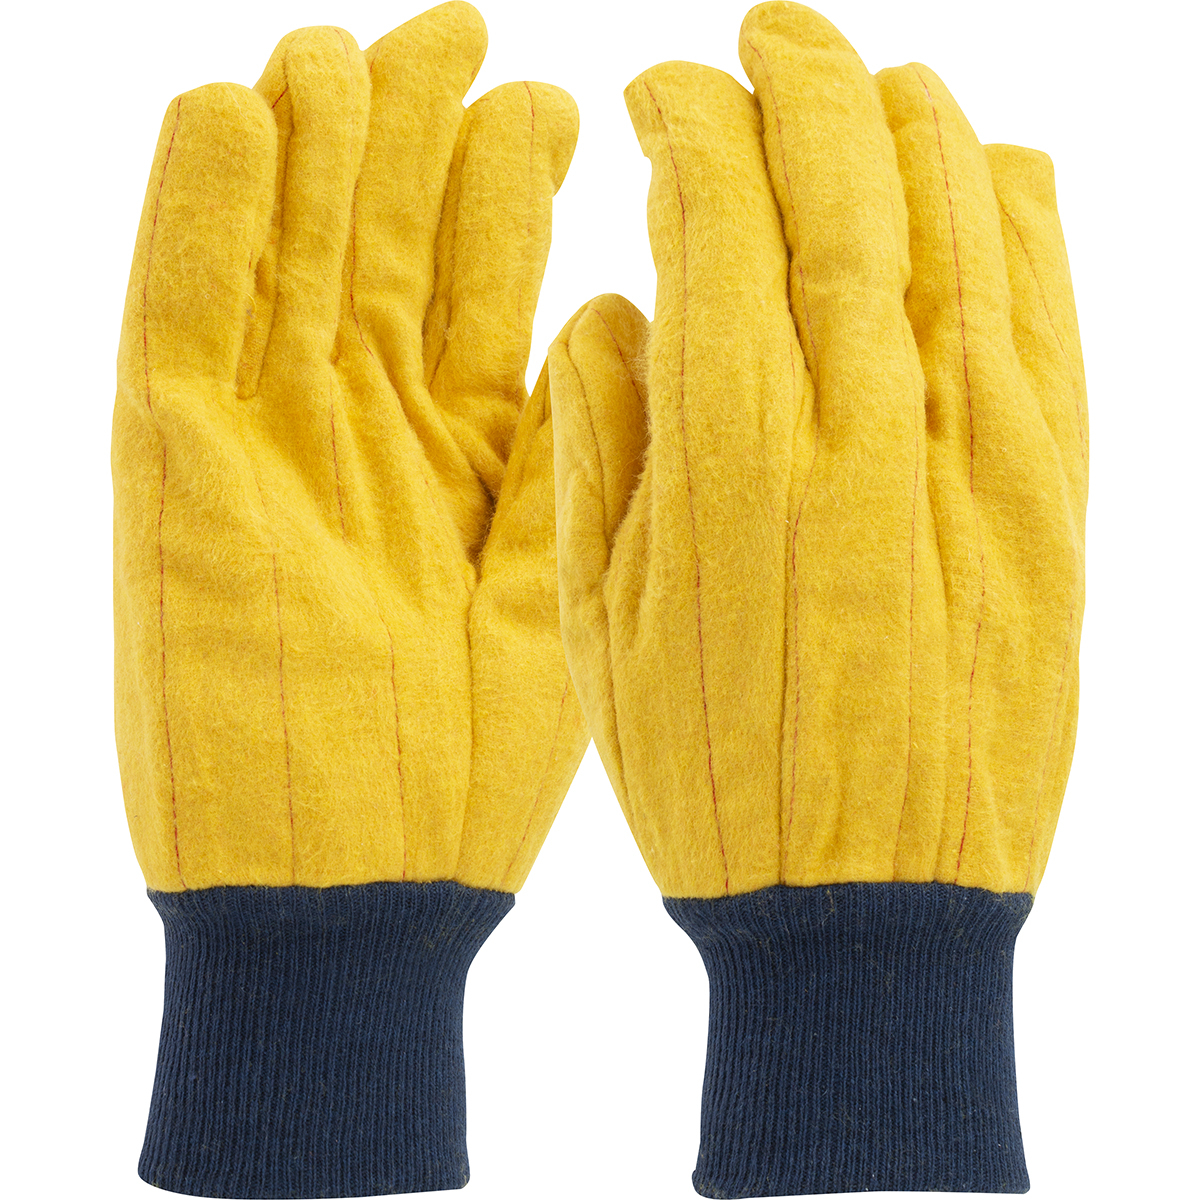 Fabric and General Purpose Gloves